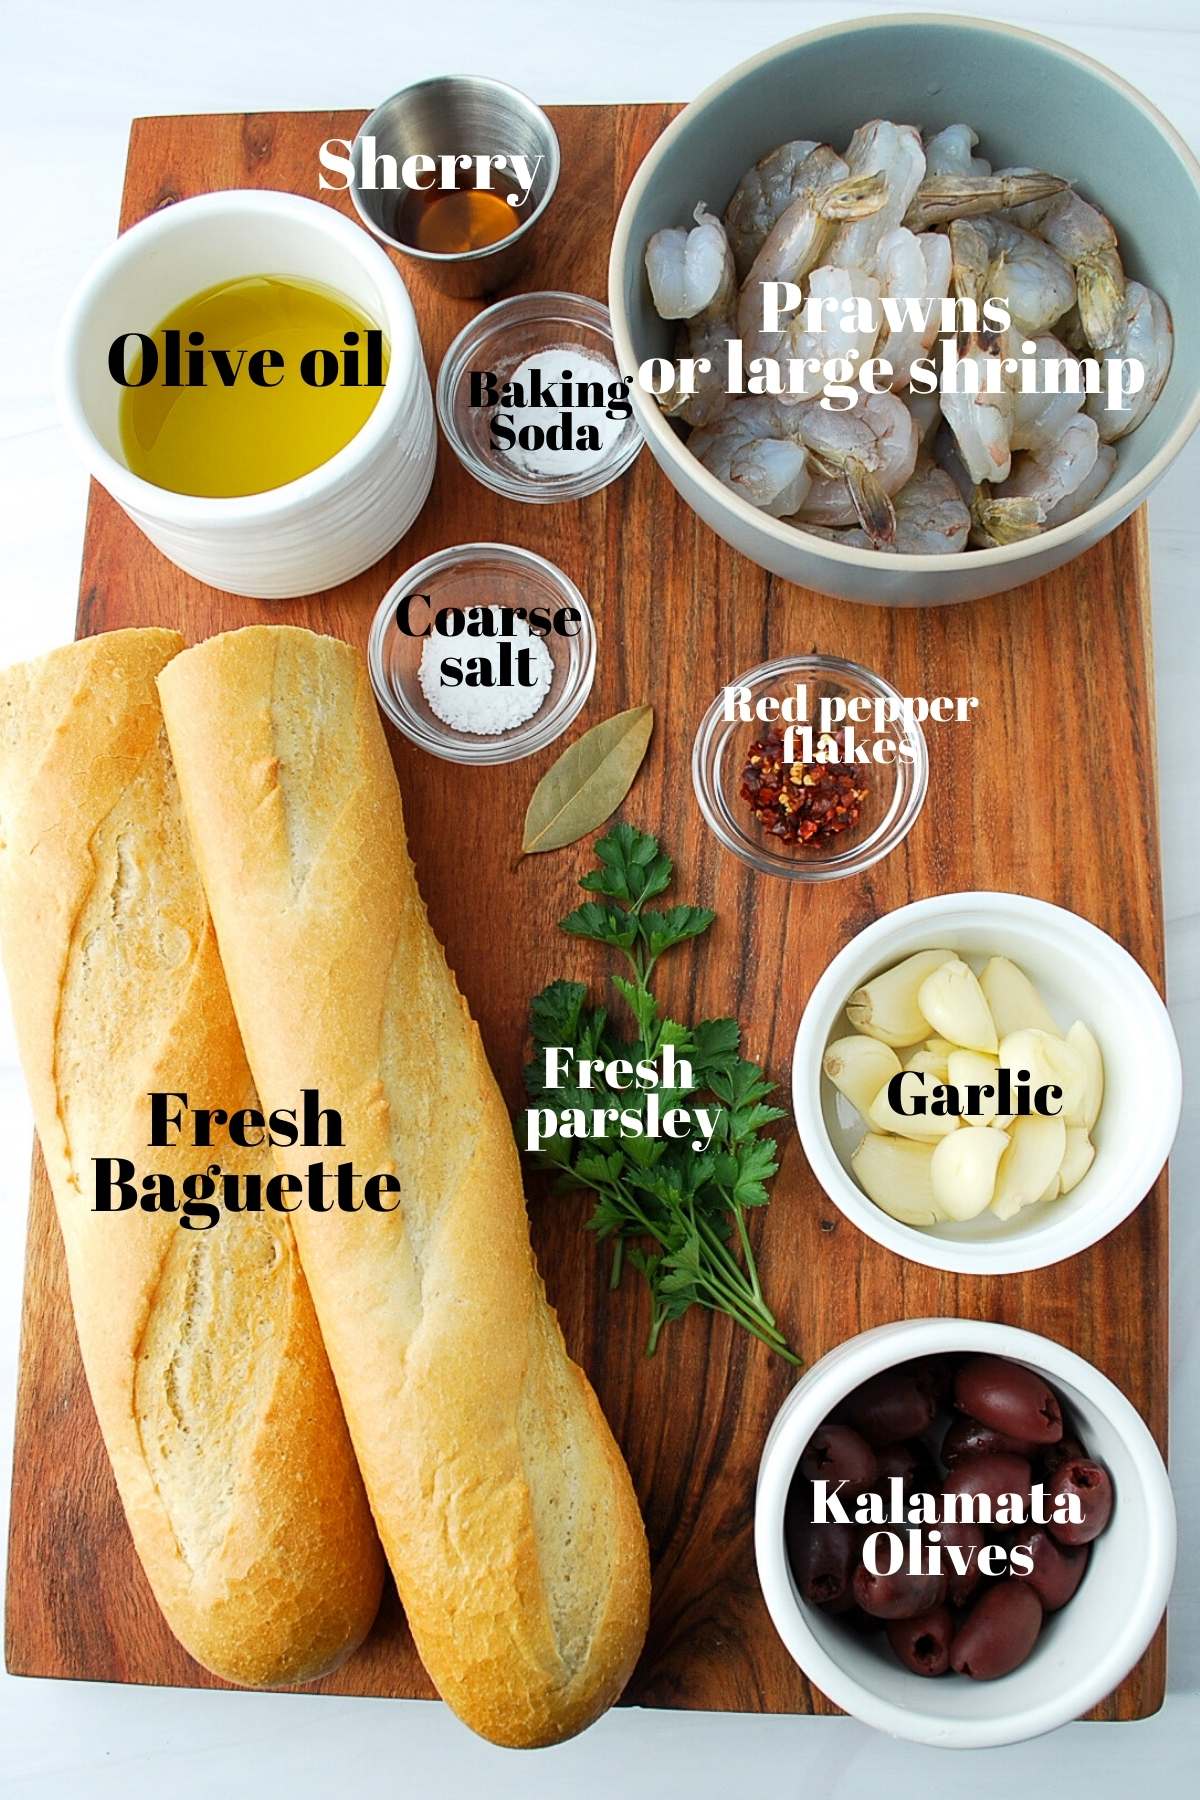 baguette, olive oil, prawns, spices, parsley, and garlic on a wood board